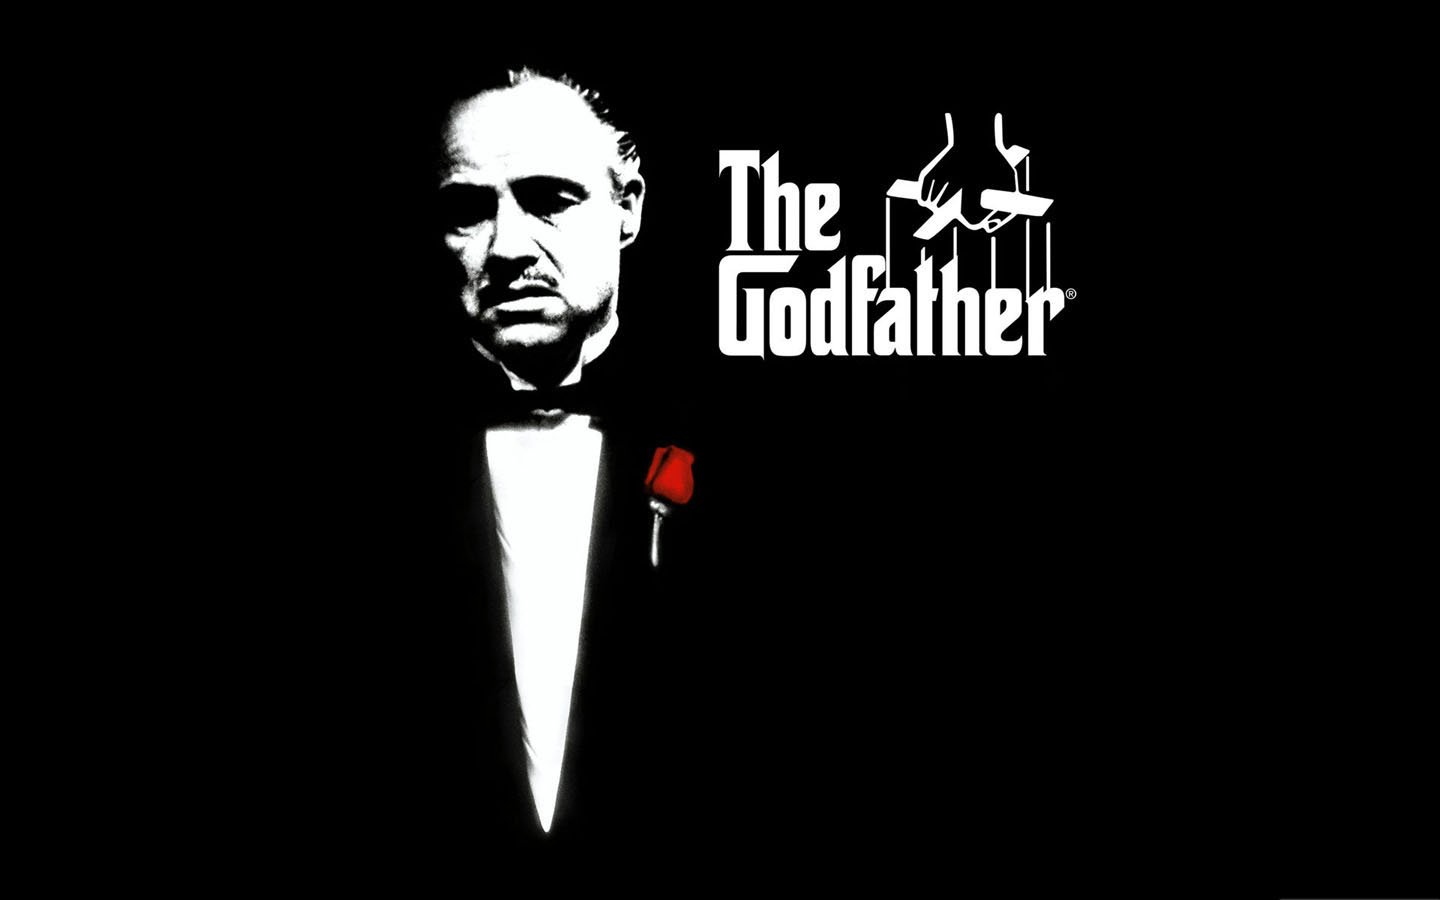 the godfather wallpaper,font,text,logo,graphic design,brand